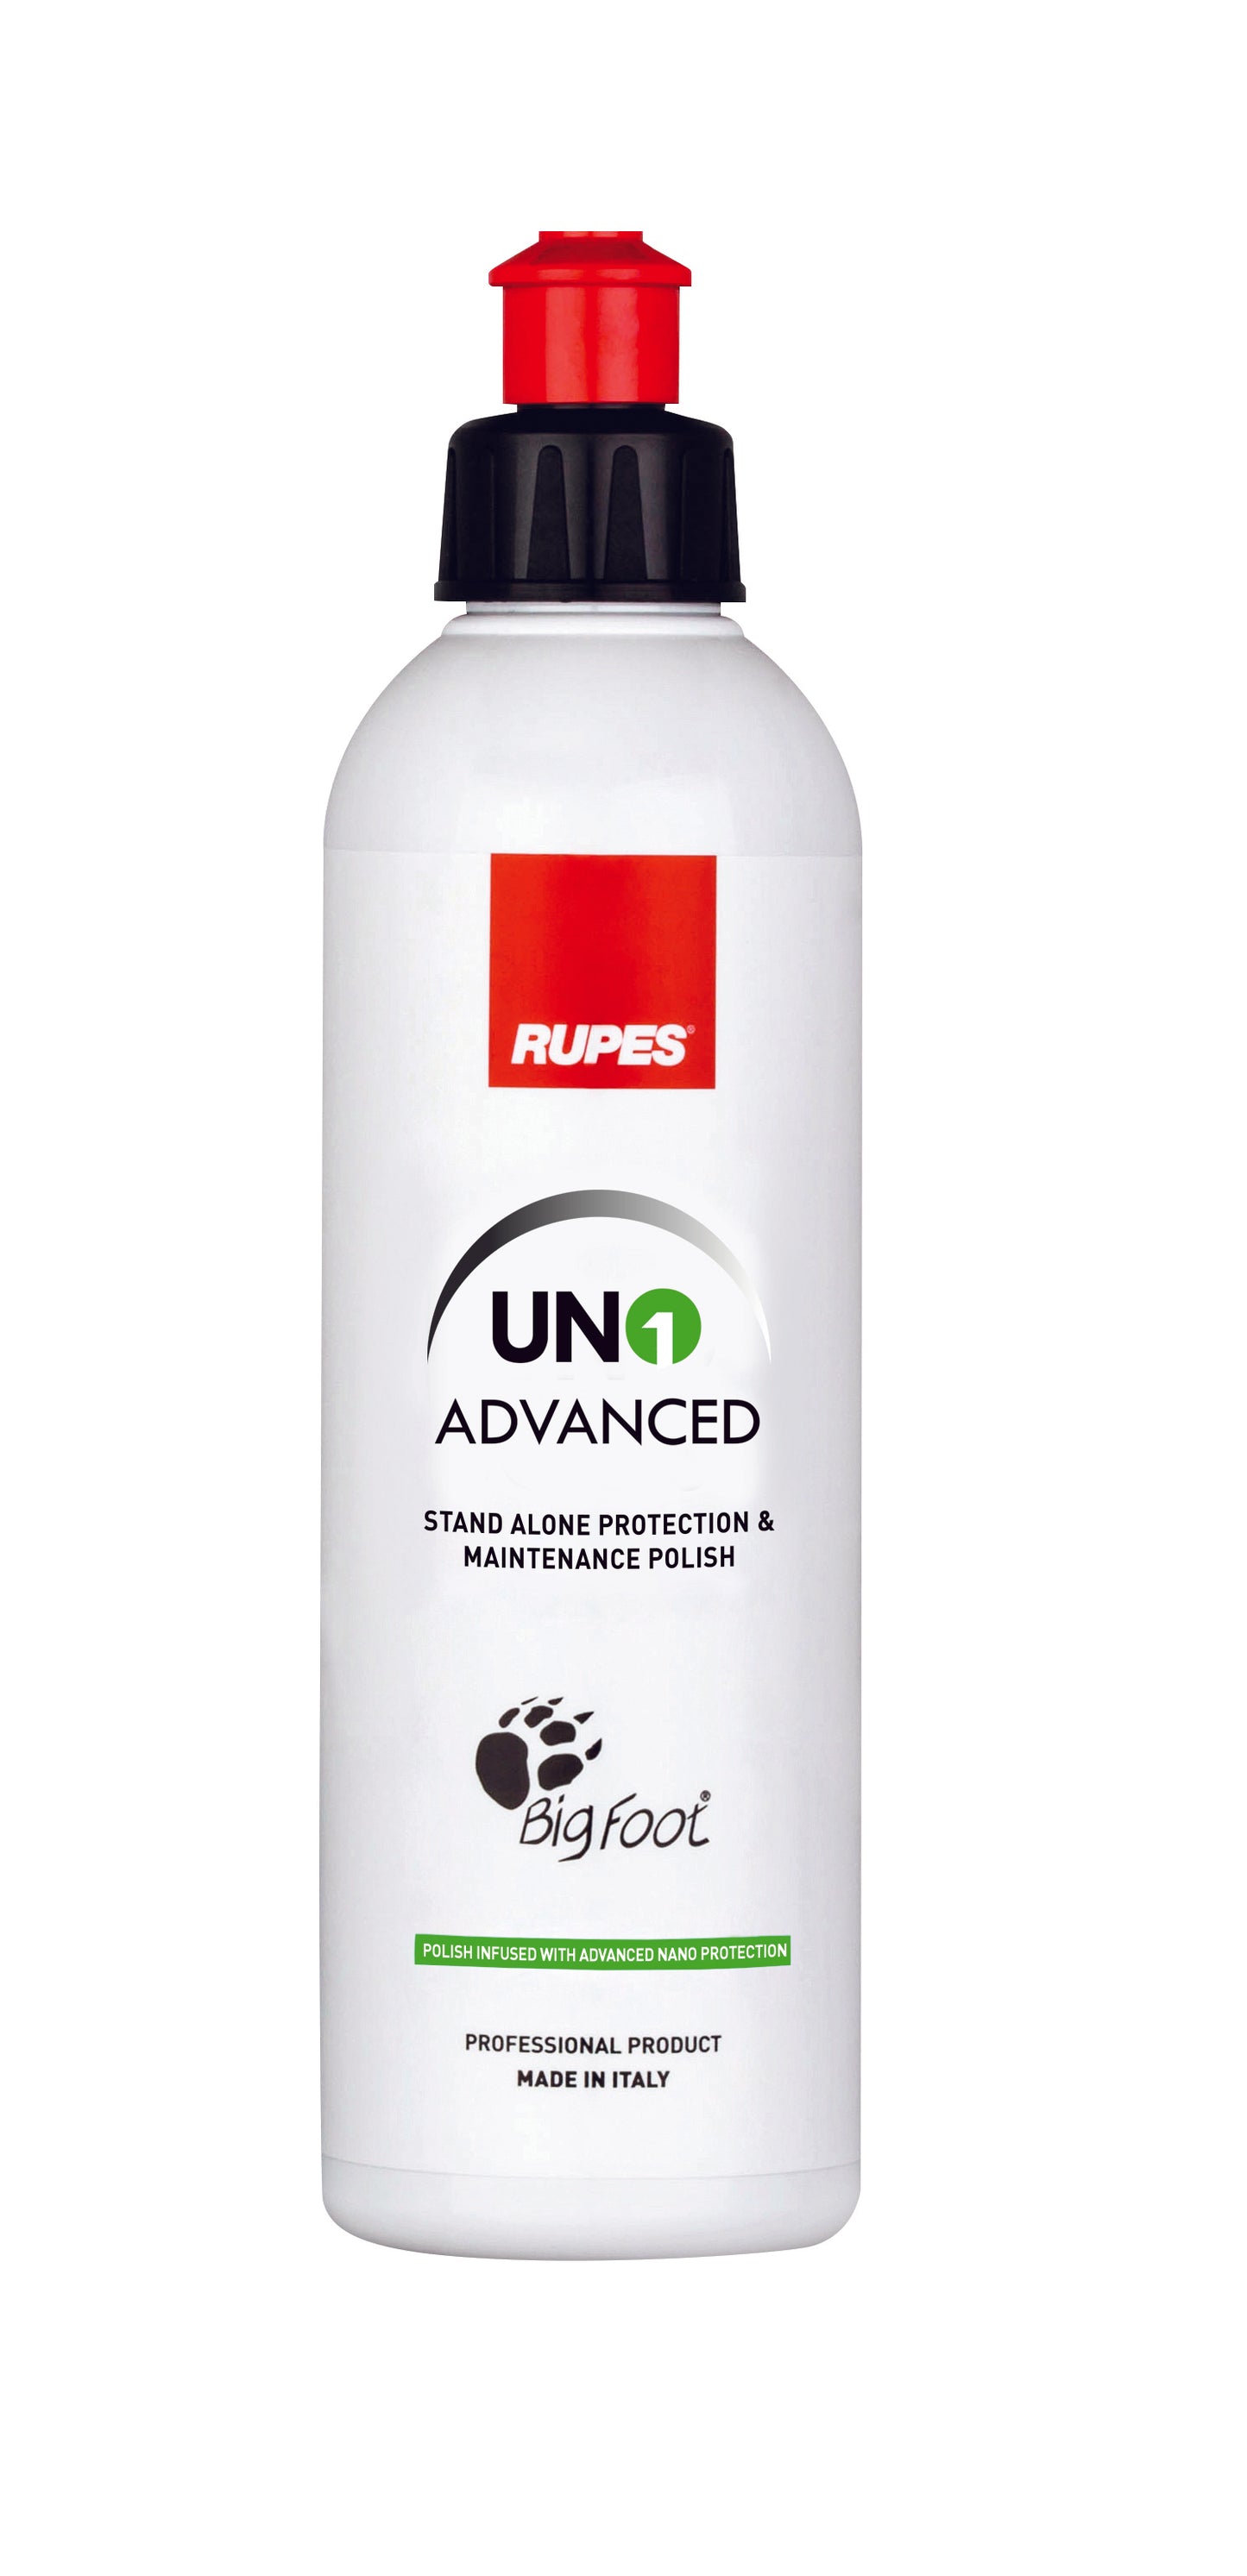 Rupes UNO ADVANCED Stand Alone Protection & Maintenance Polish (2 sizes available)